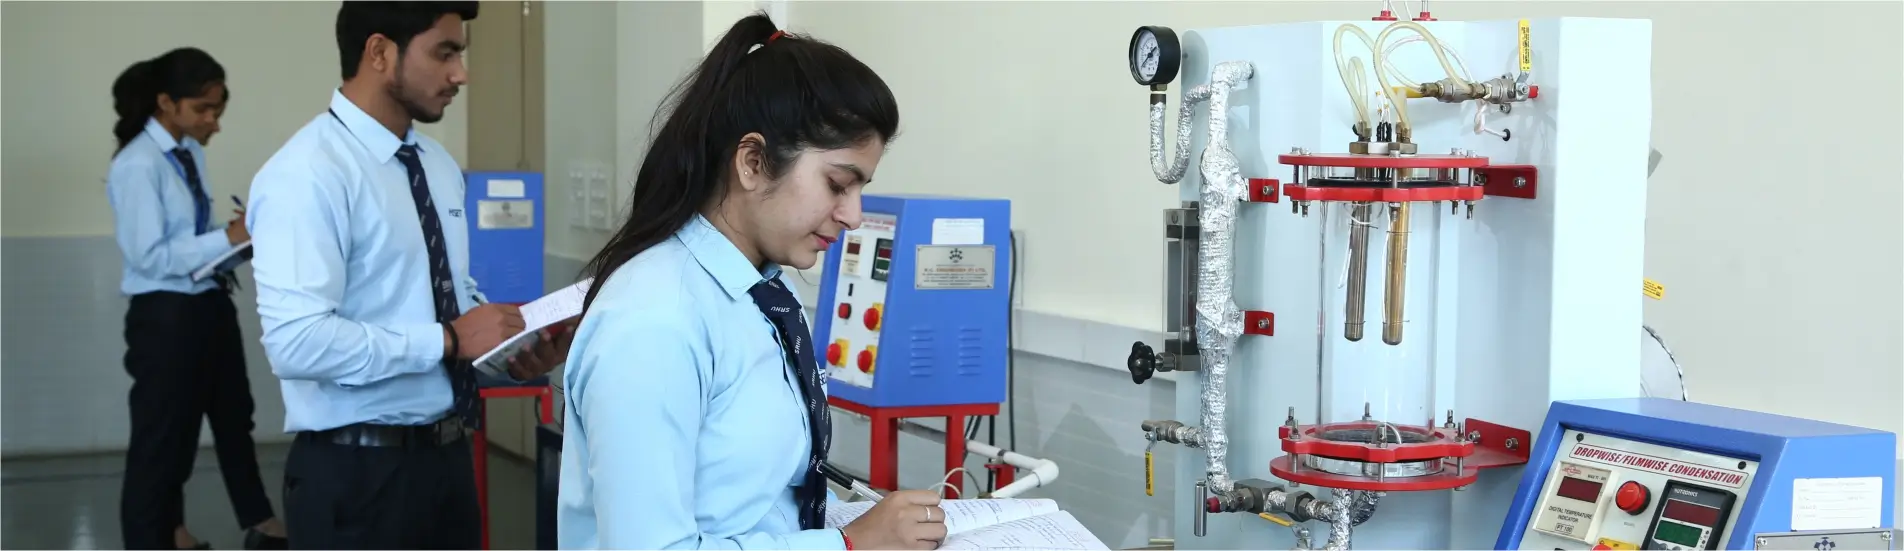 Students in lab at Gauri Himalayan School of Science and Technology